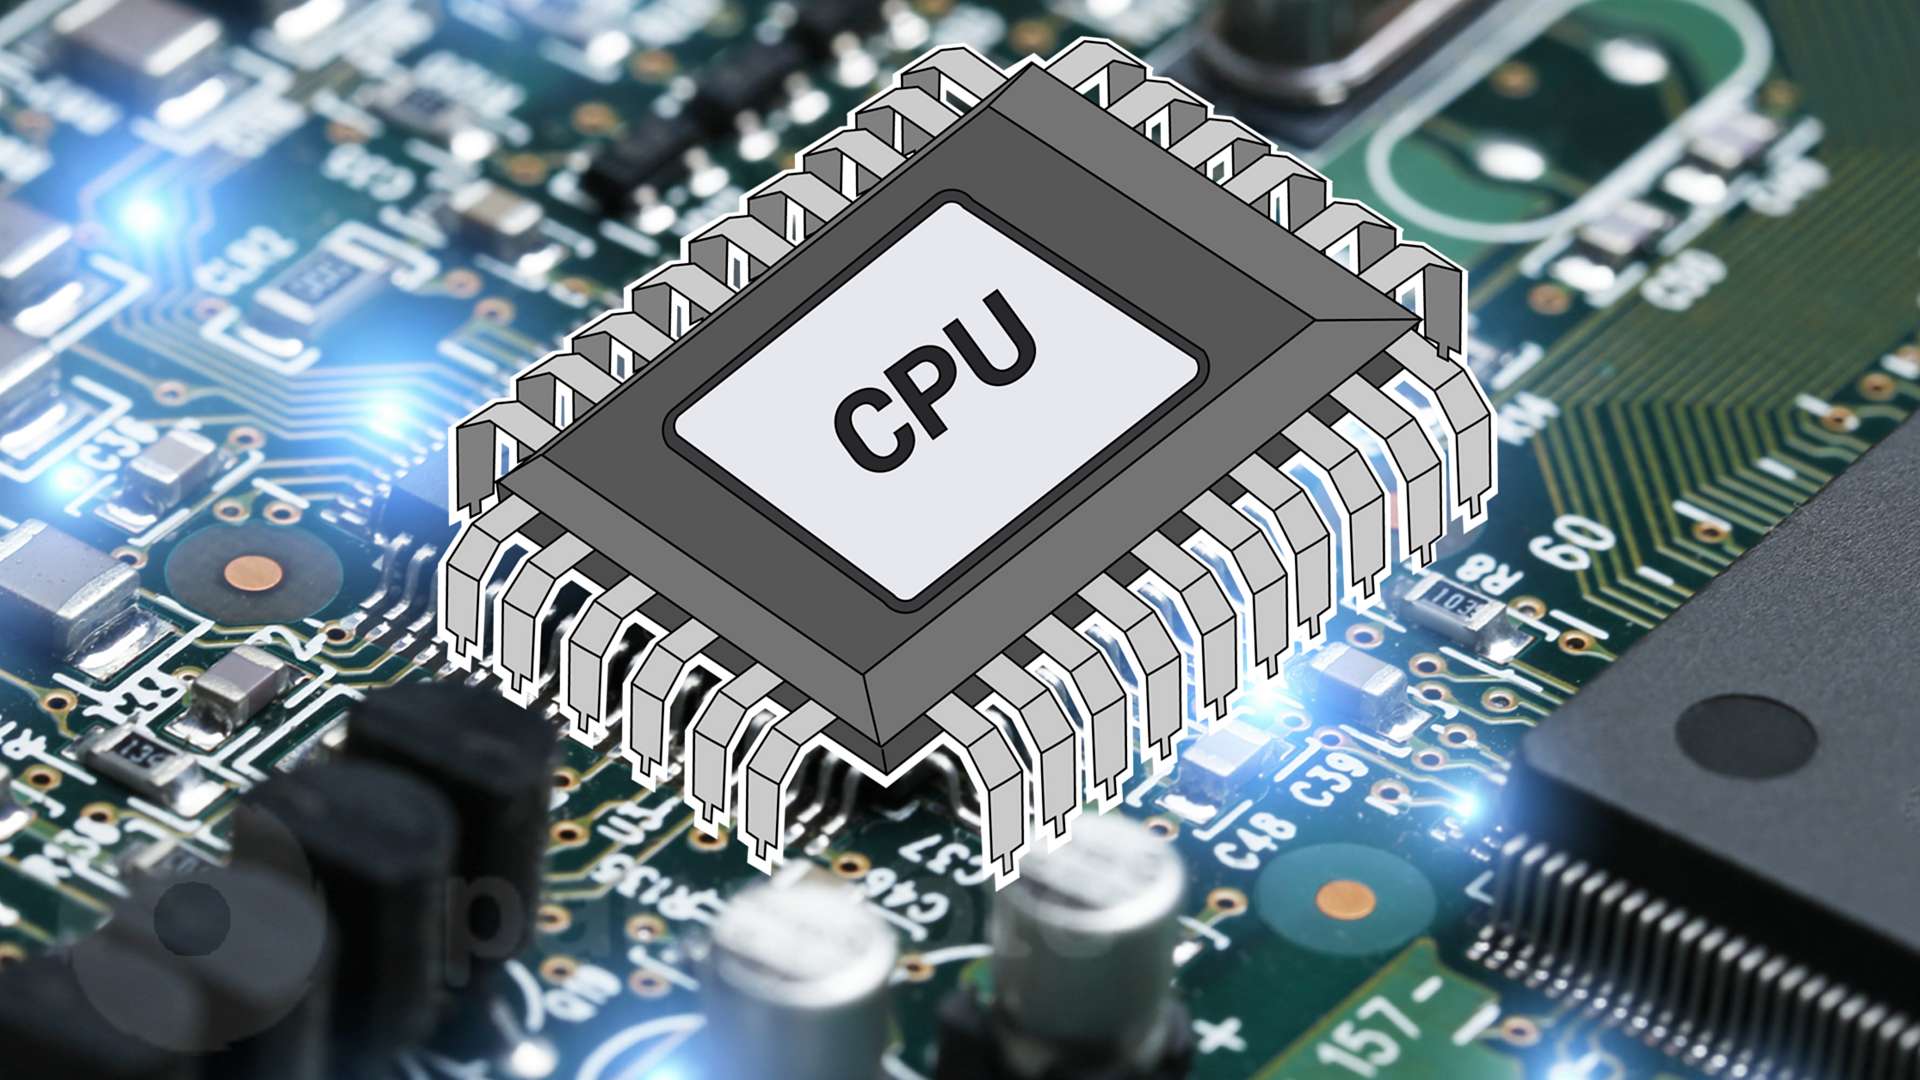 Why computer chips started to wear out faster?